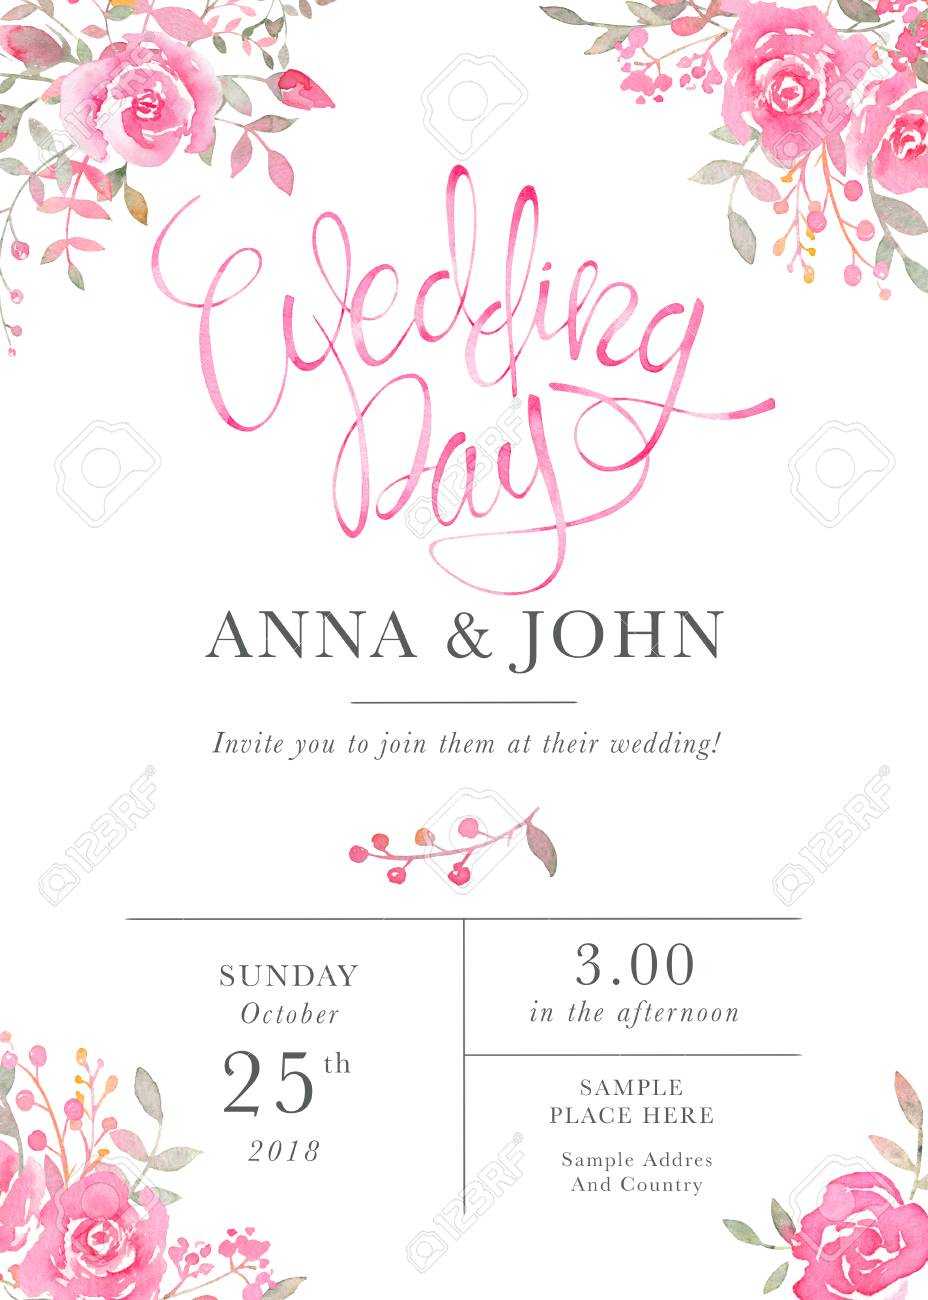 Wedding Invitation Card Template With Watercolor Rose Flowers For Free E Wedding Invitation Card Templates